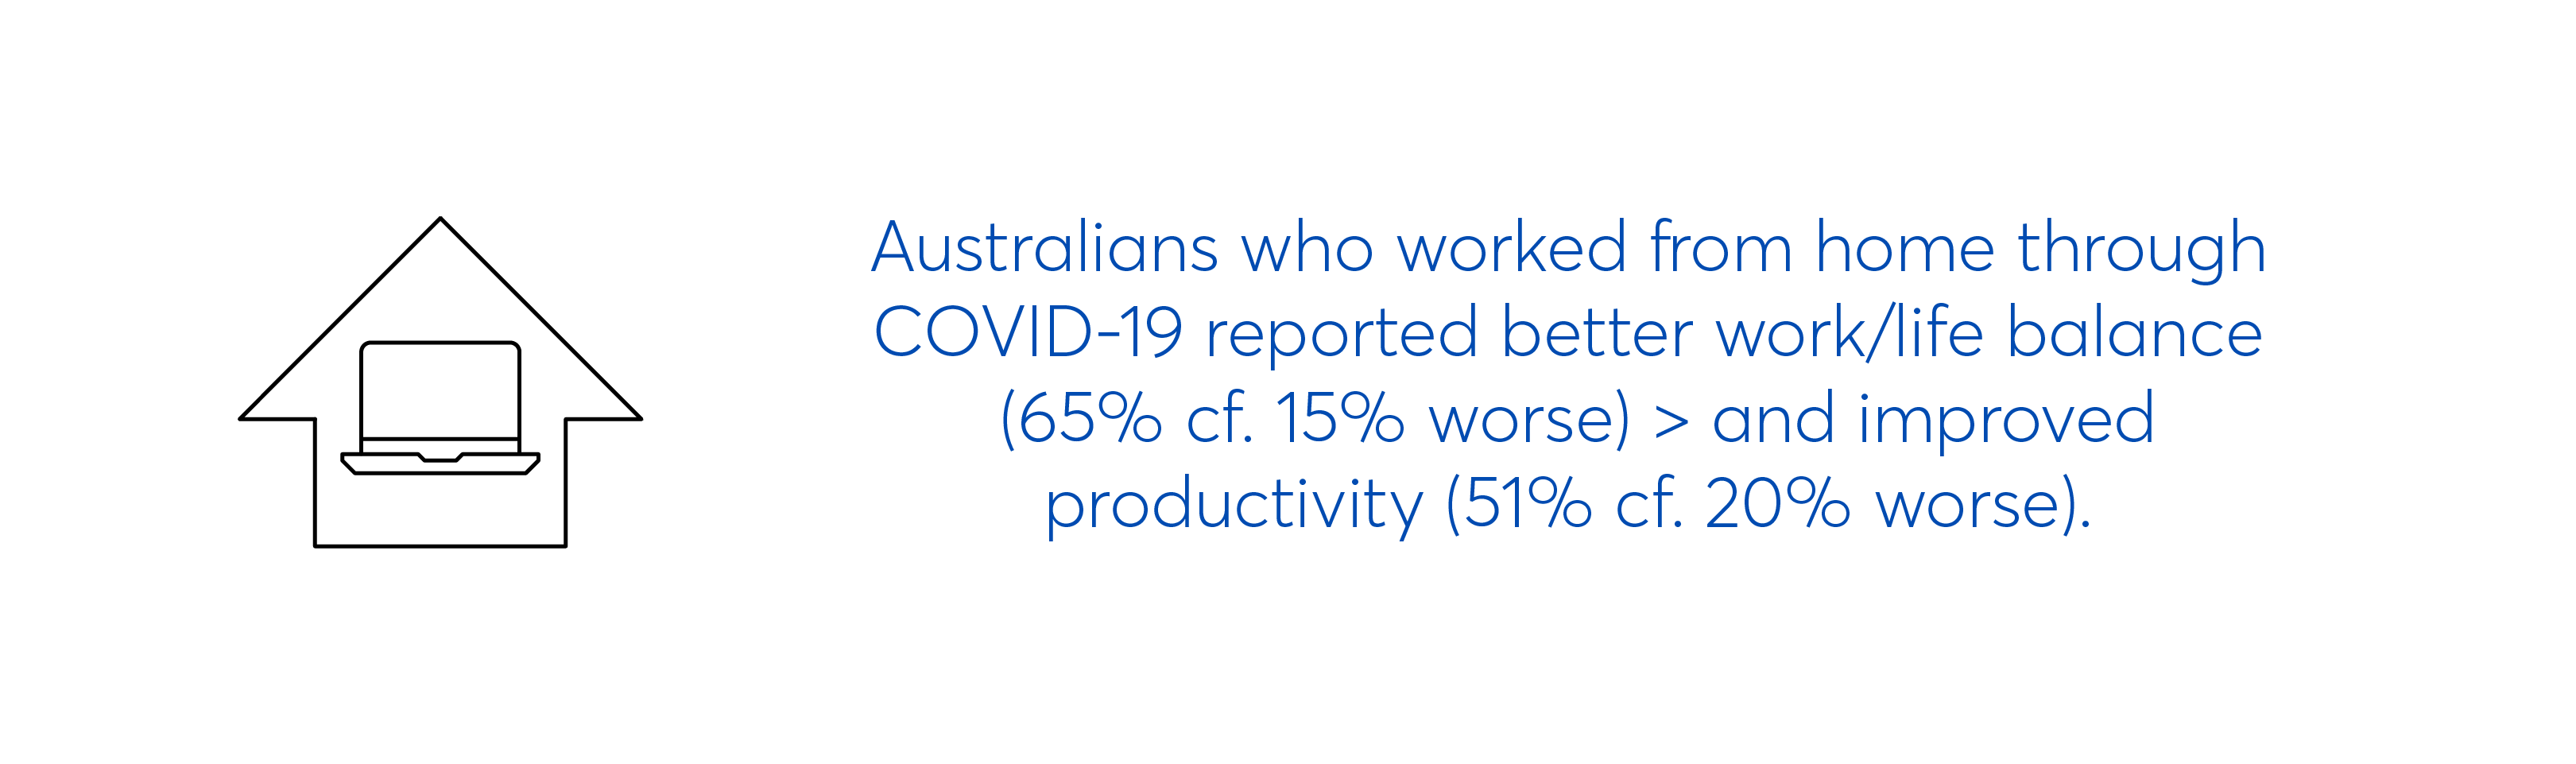 Australians working from home reported better work/life balance and productivity